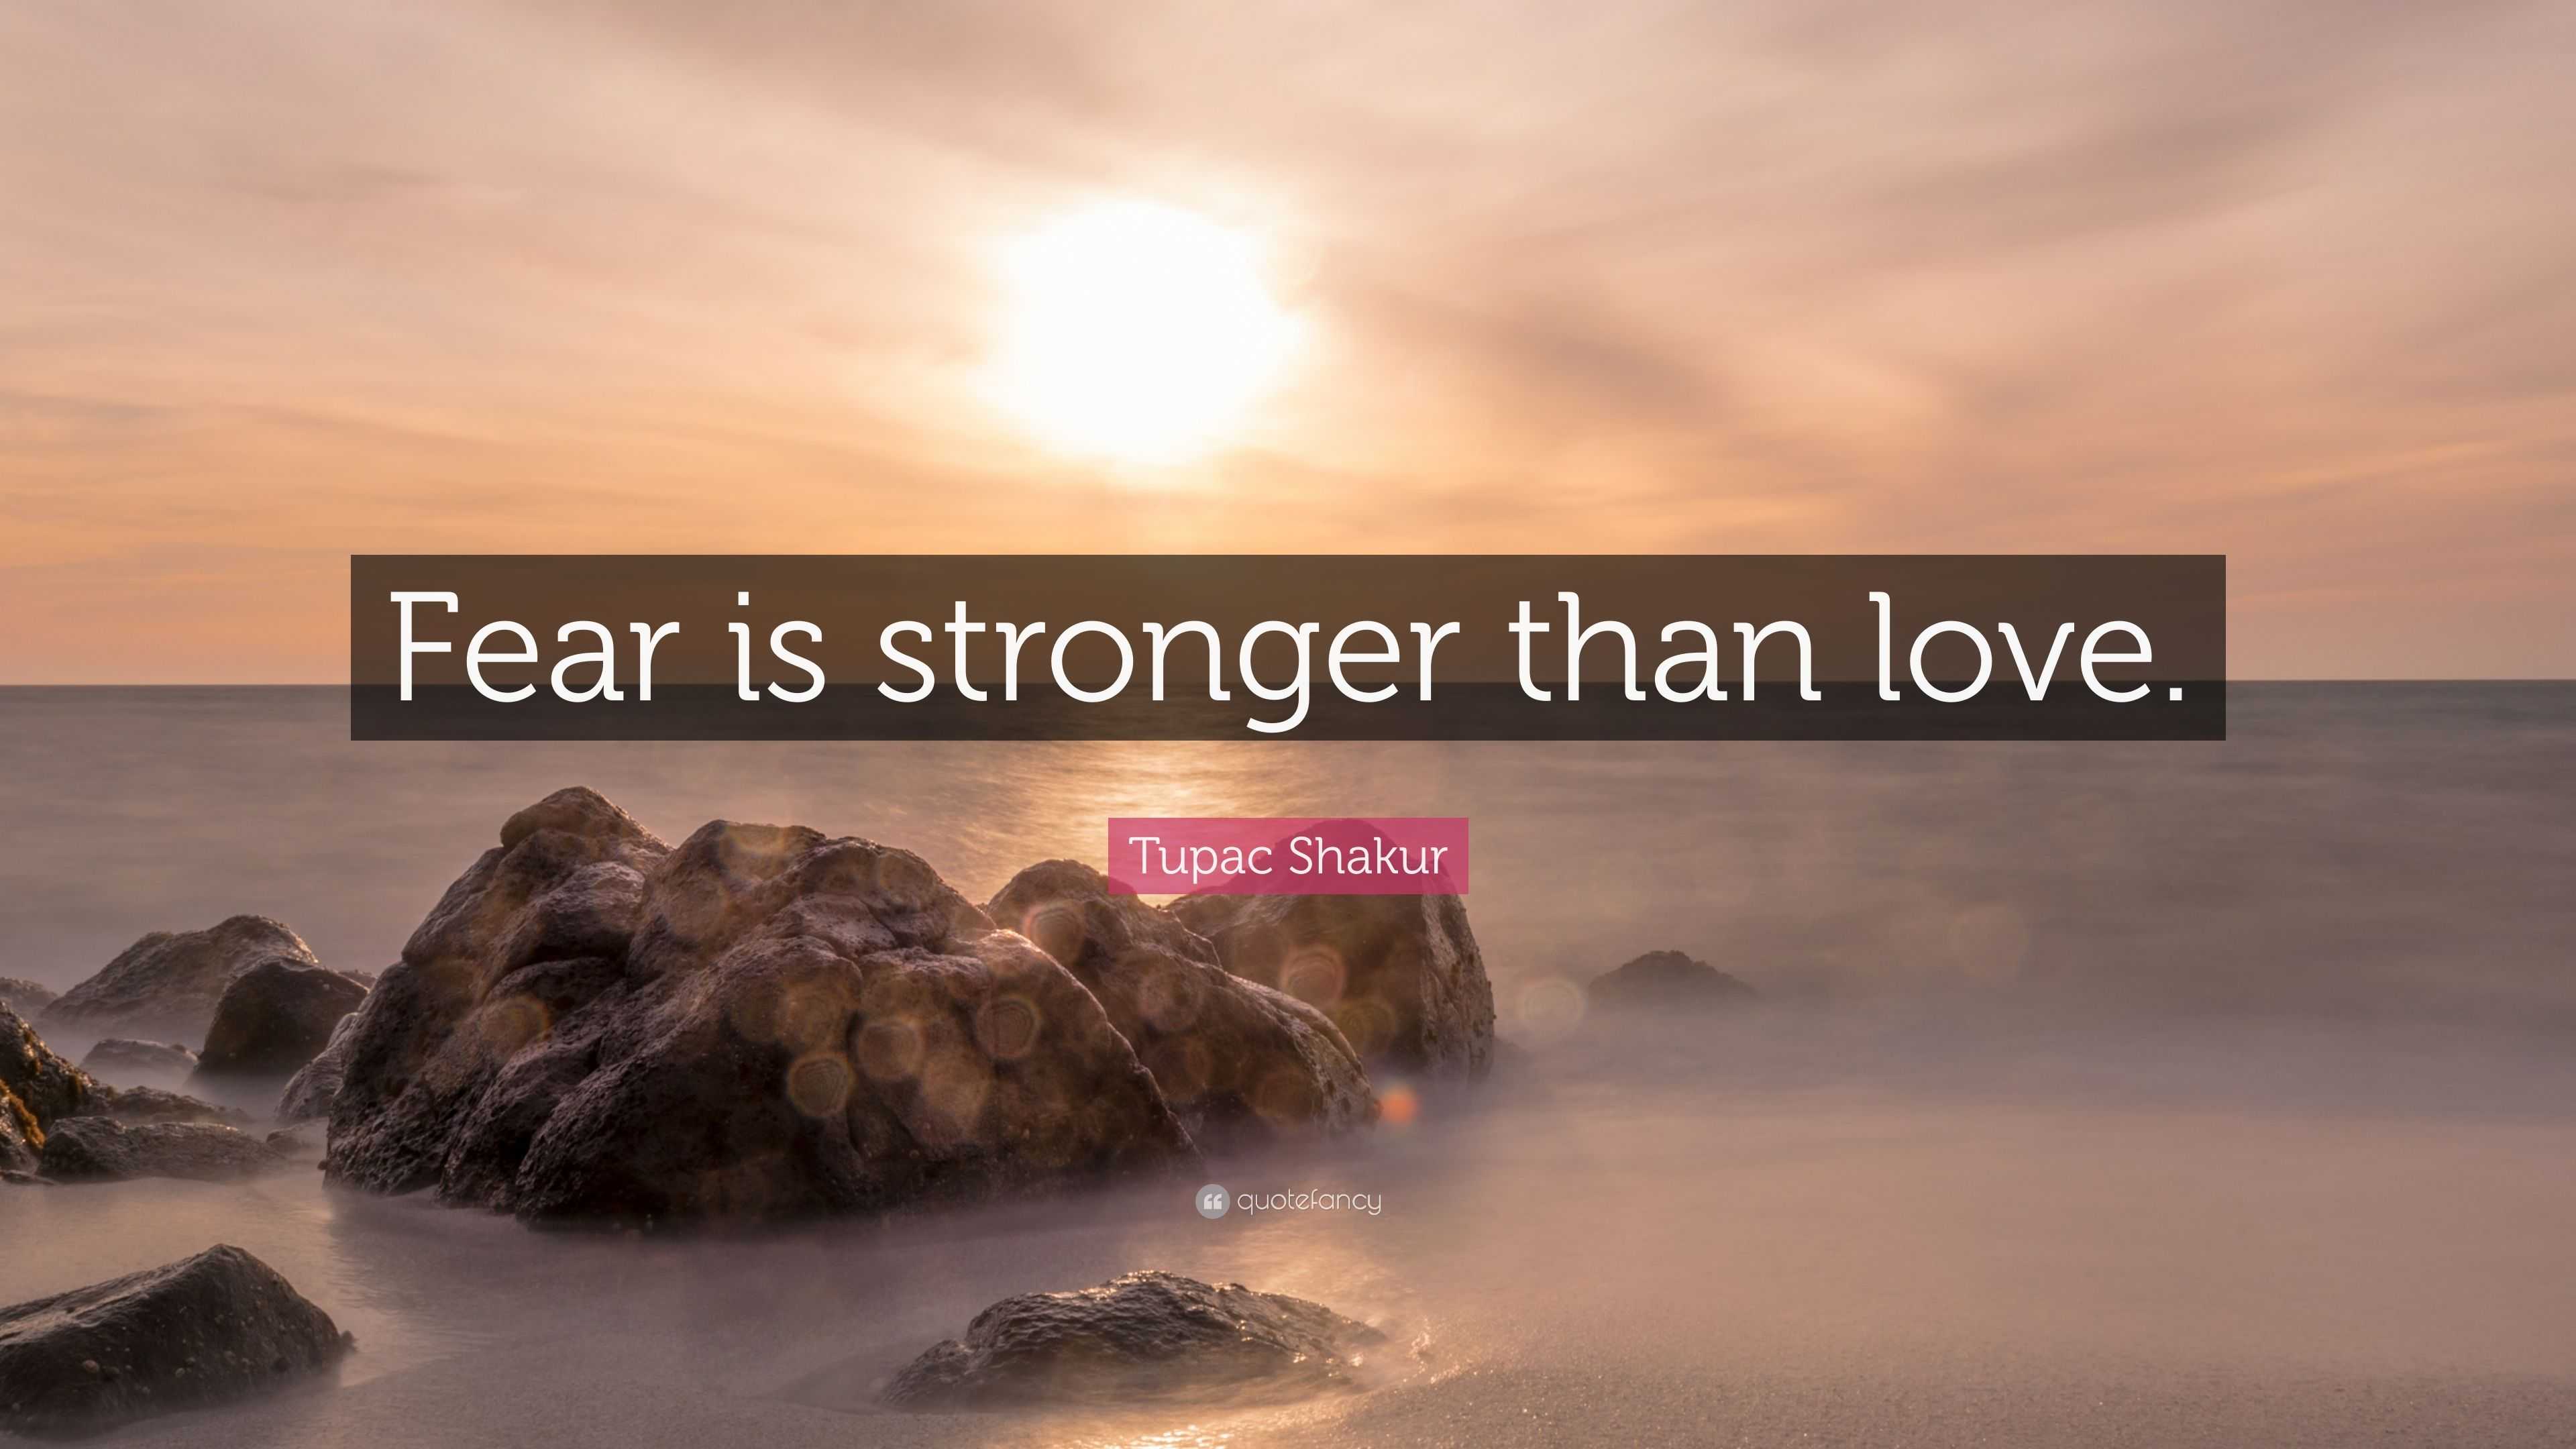 is fear or love stronger